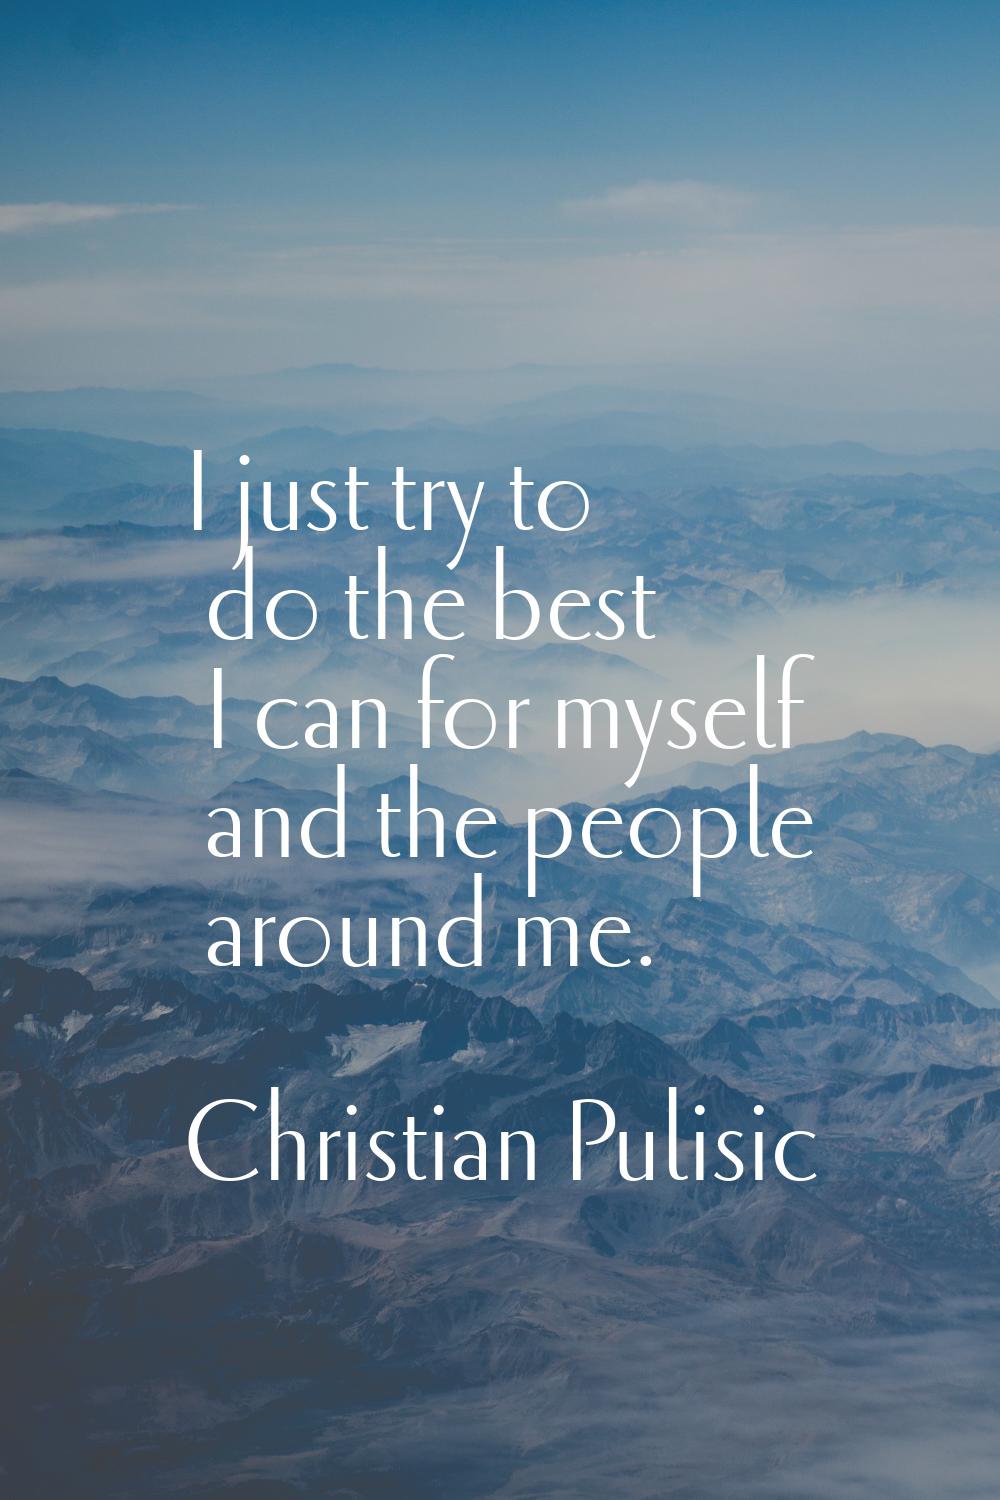 I just try to do the best I can for myself and the people around me.